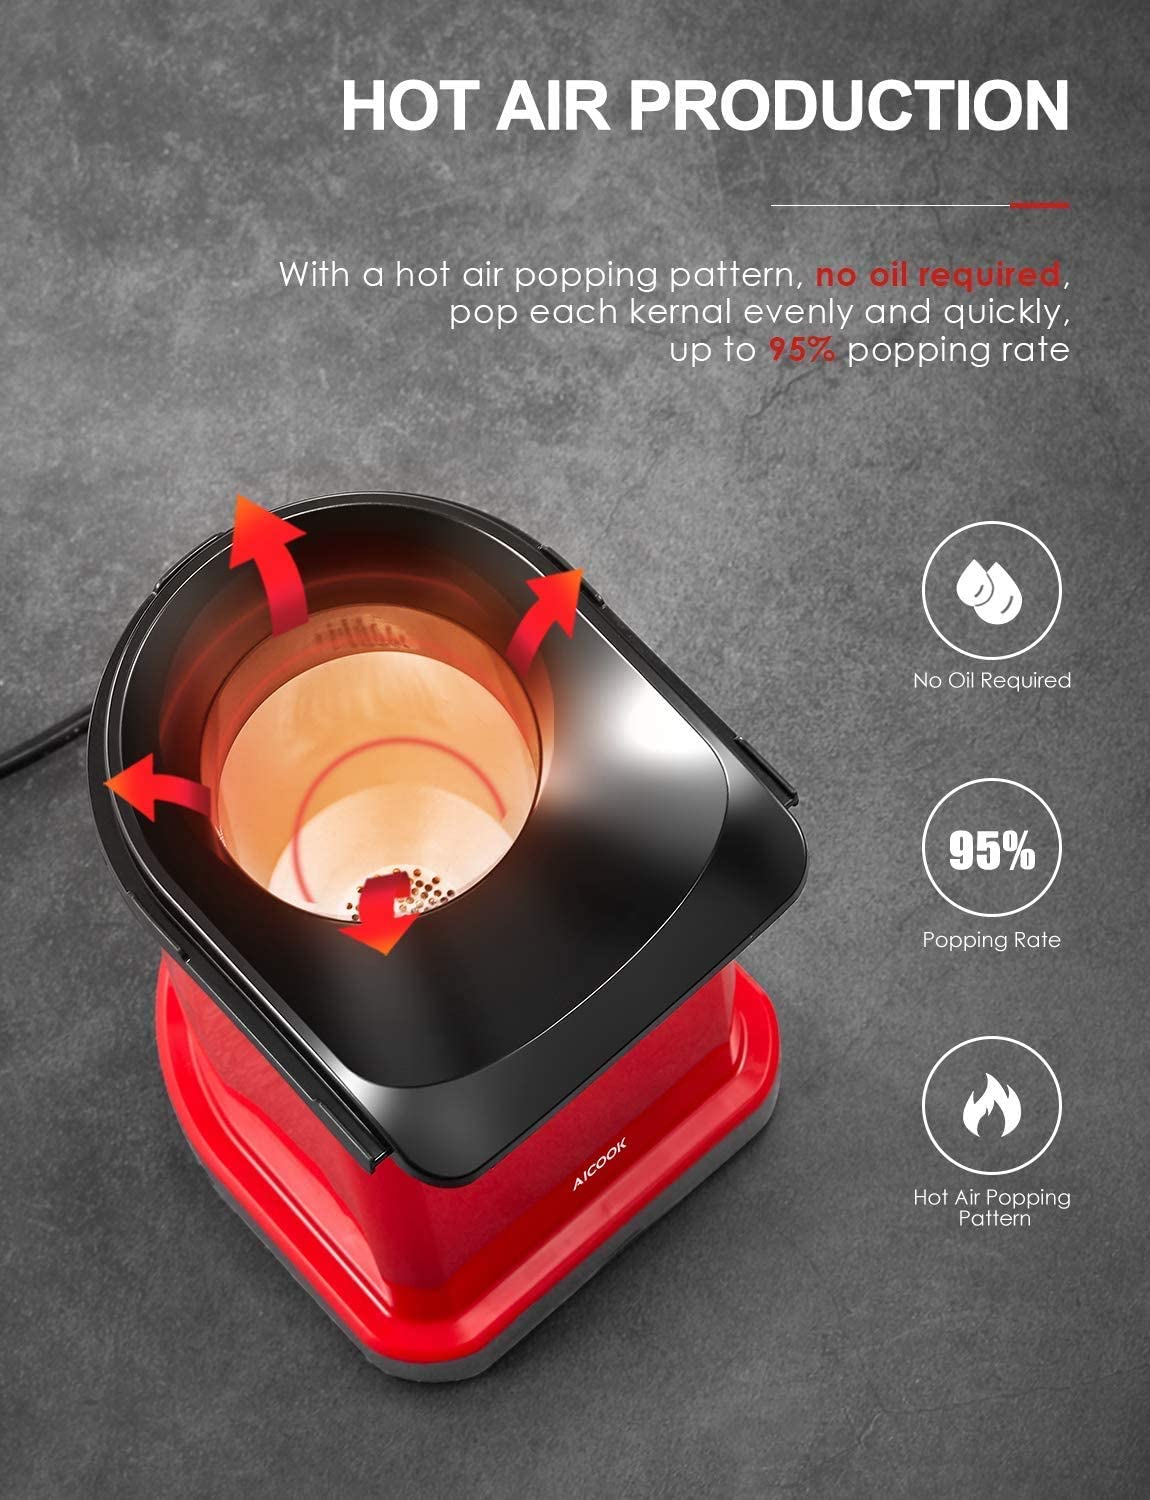 AICOOK | Hot Air Popcorn Popper, 1400W Home Popcorn Maker with Measuring Cup & Removable Lid, 3 Minutes Fast, Hot Air Production, Healthy Oil-Free & BPA-Free, Red